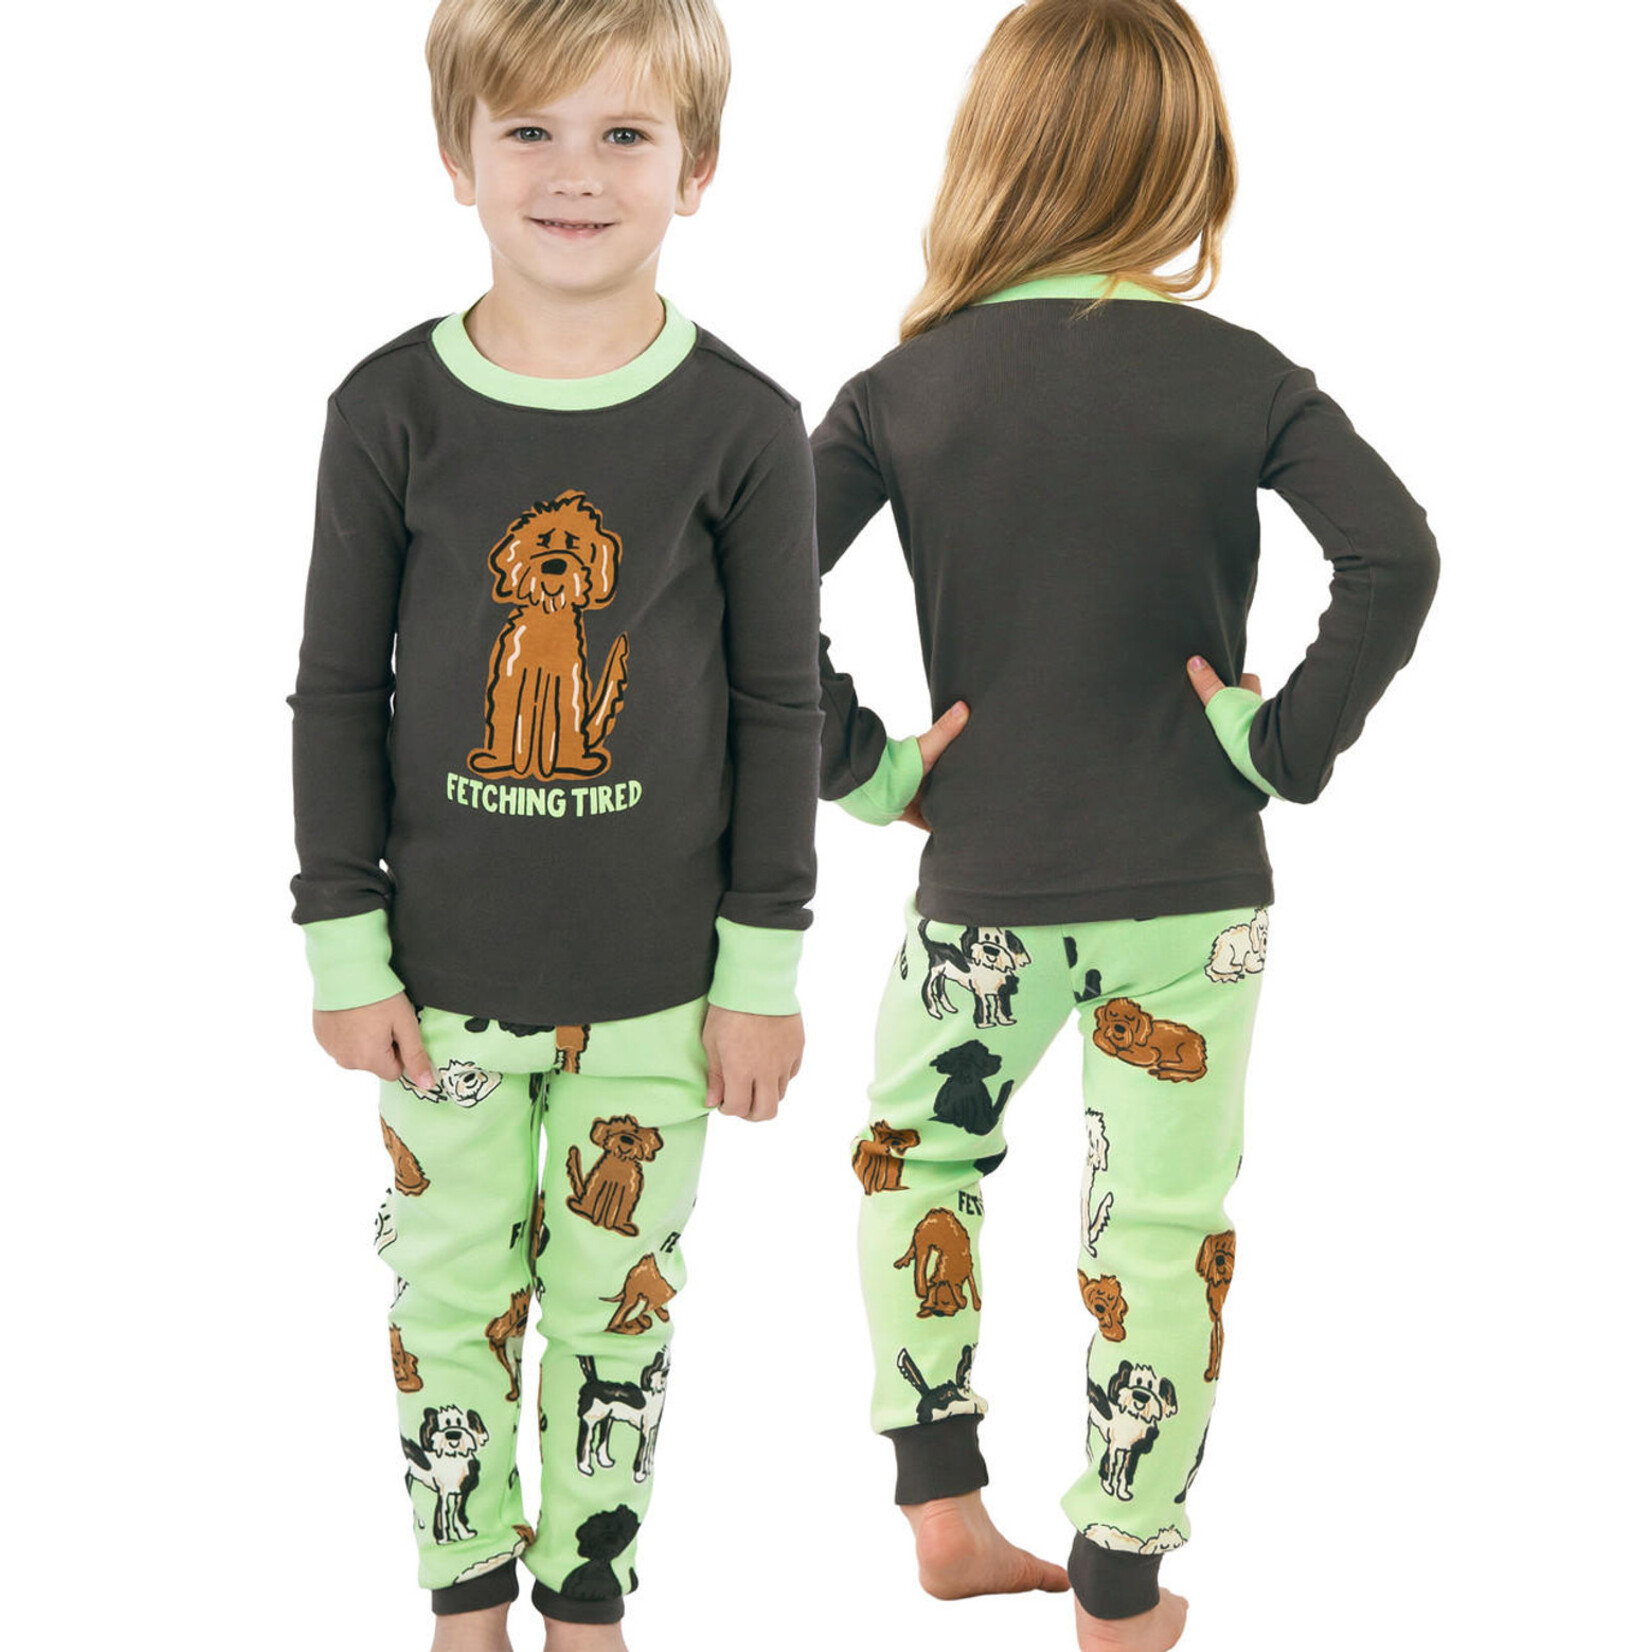 Lazy One Fetching Tired Kid's Long Sleeve PJ's